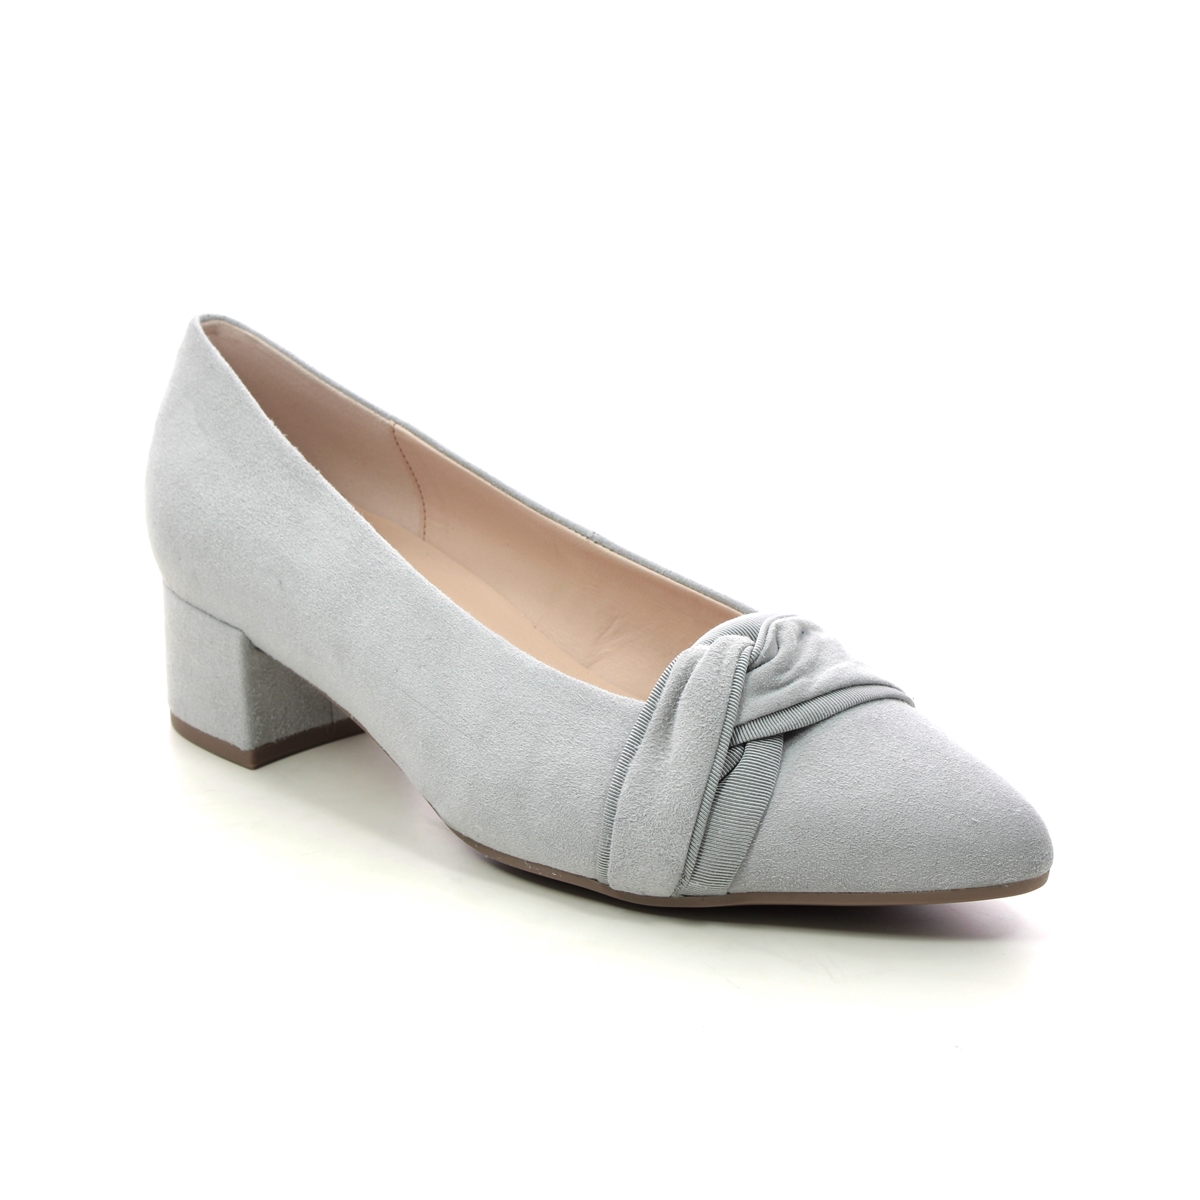 Gabor Harding Light Grey Suede Womens Court Shoes 21.441.19 in a Plain Leather in Size 4.5